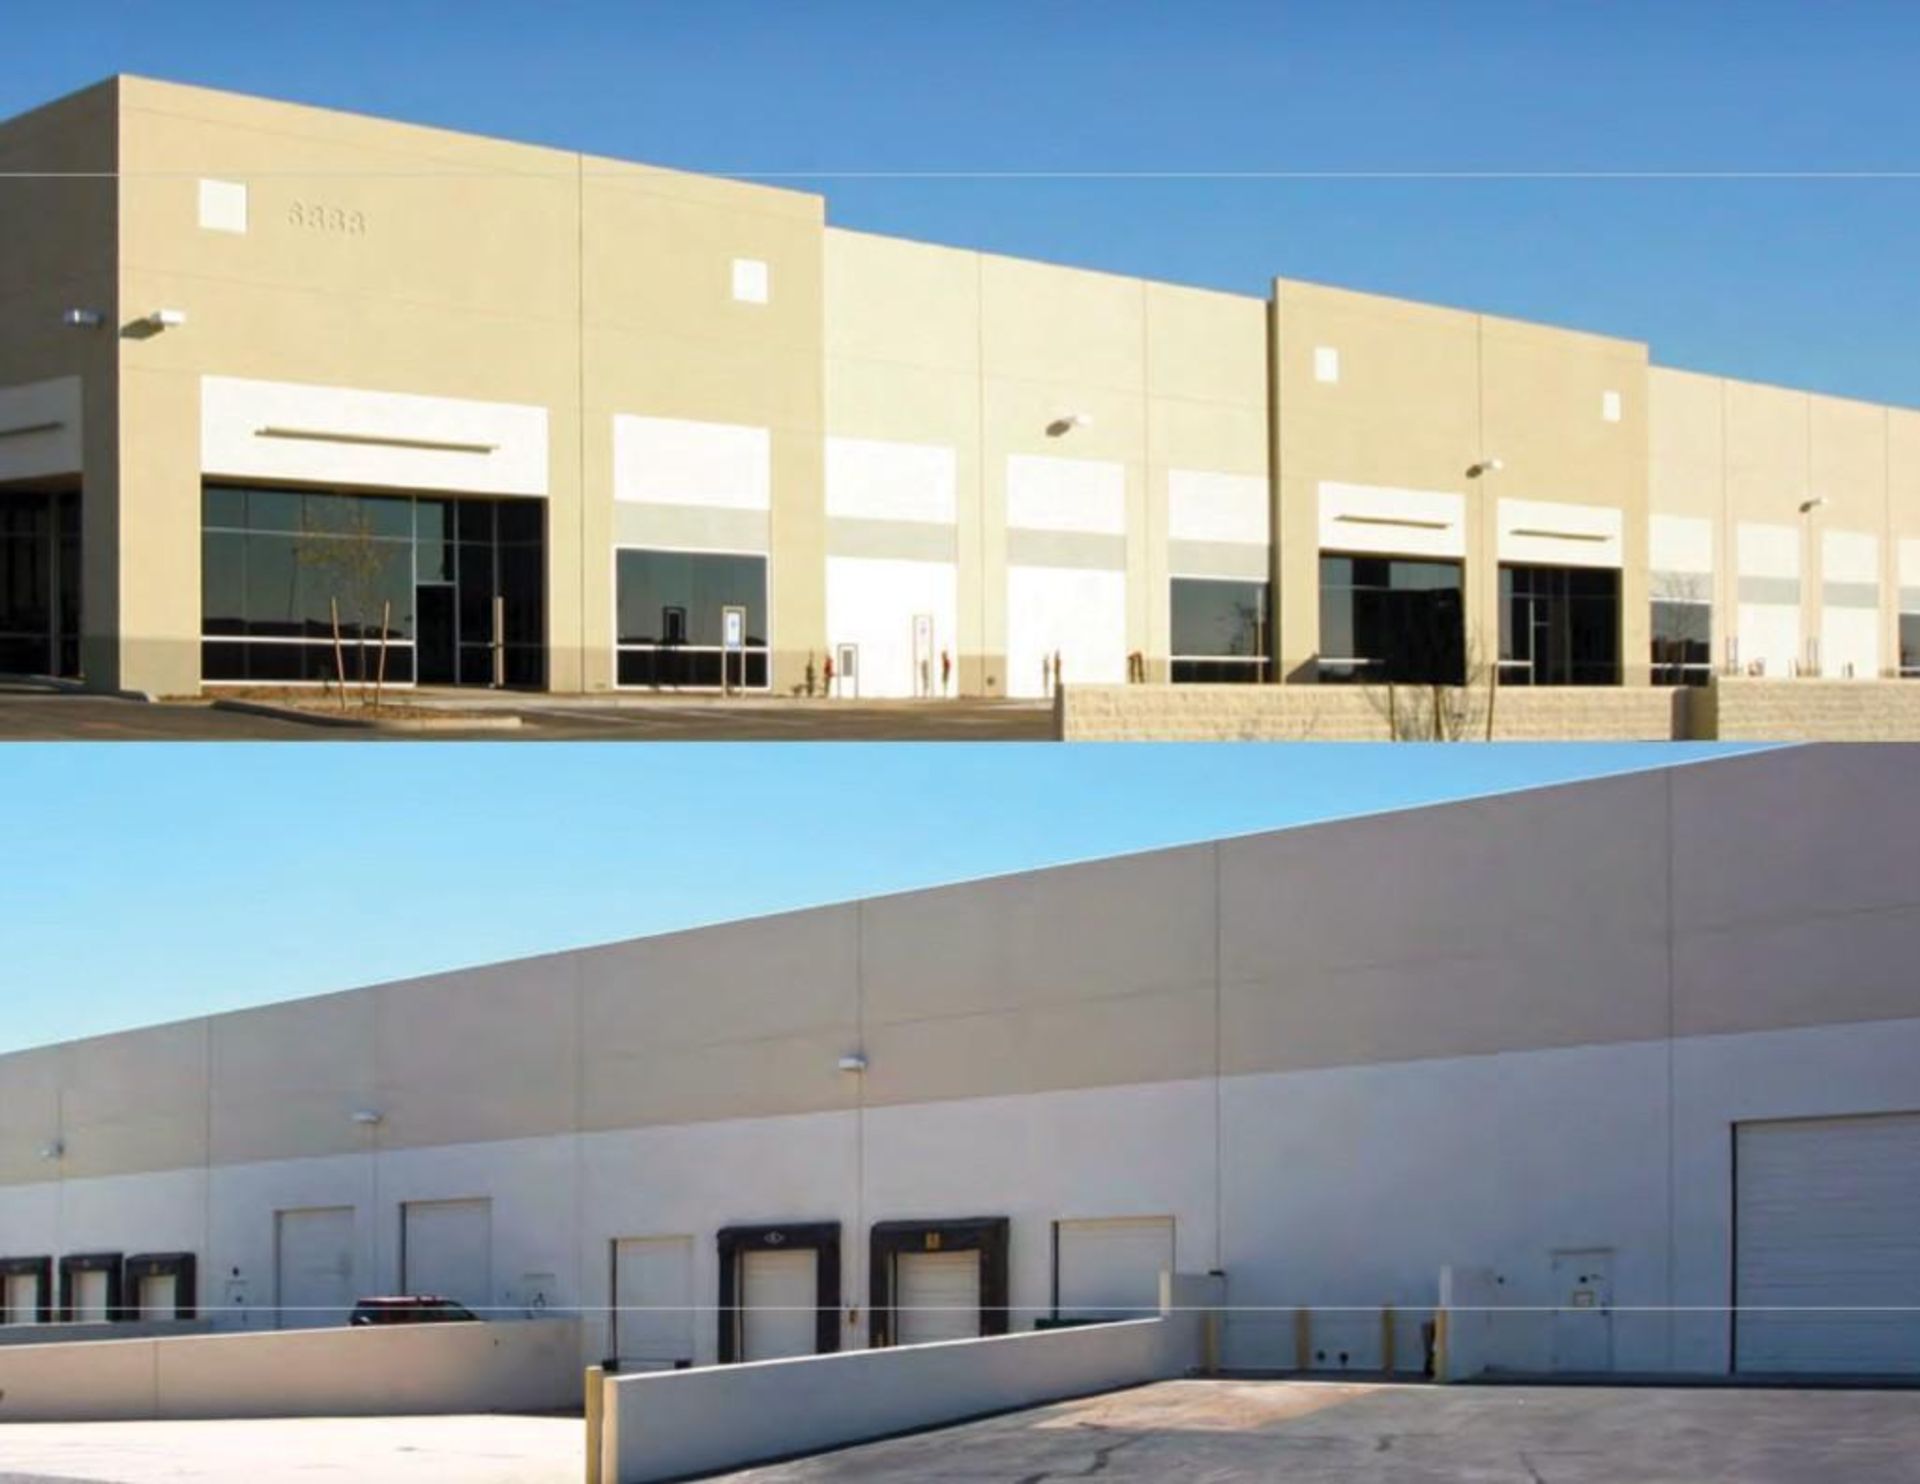 SUBLEASE - Manufacturing, Packaging, and Distribution Facility - Image 5 of 6